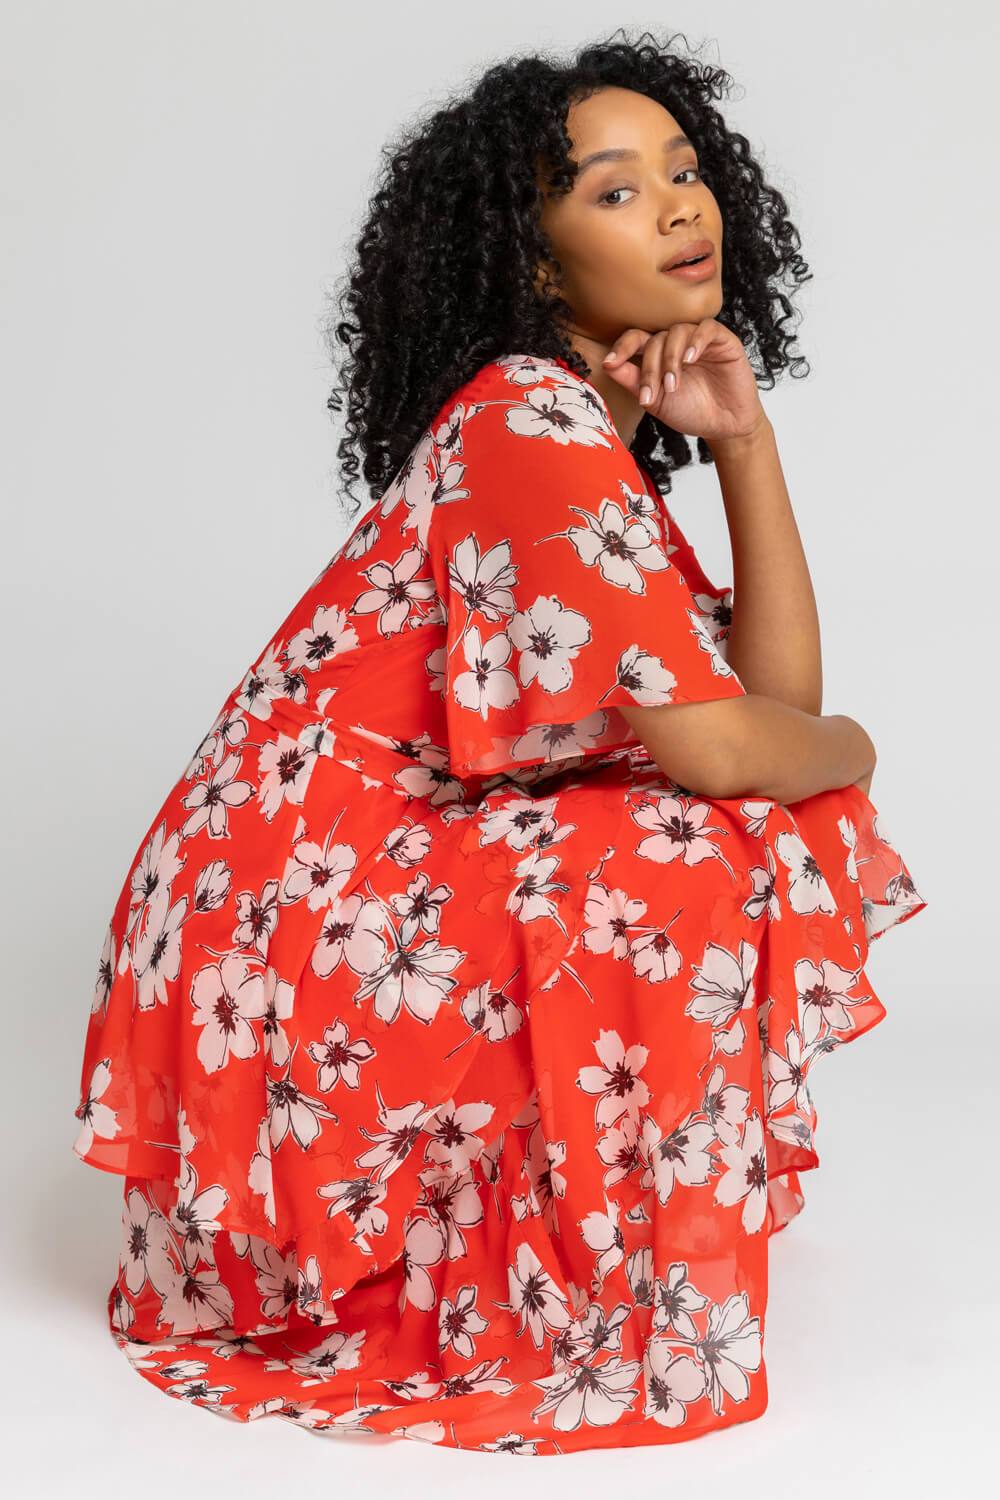 Red Petite Floral Print Tiered Frill Dress, Image 5 of 5